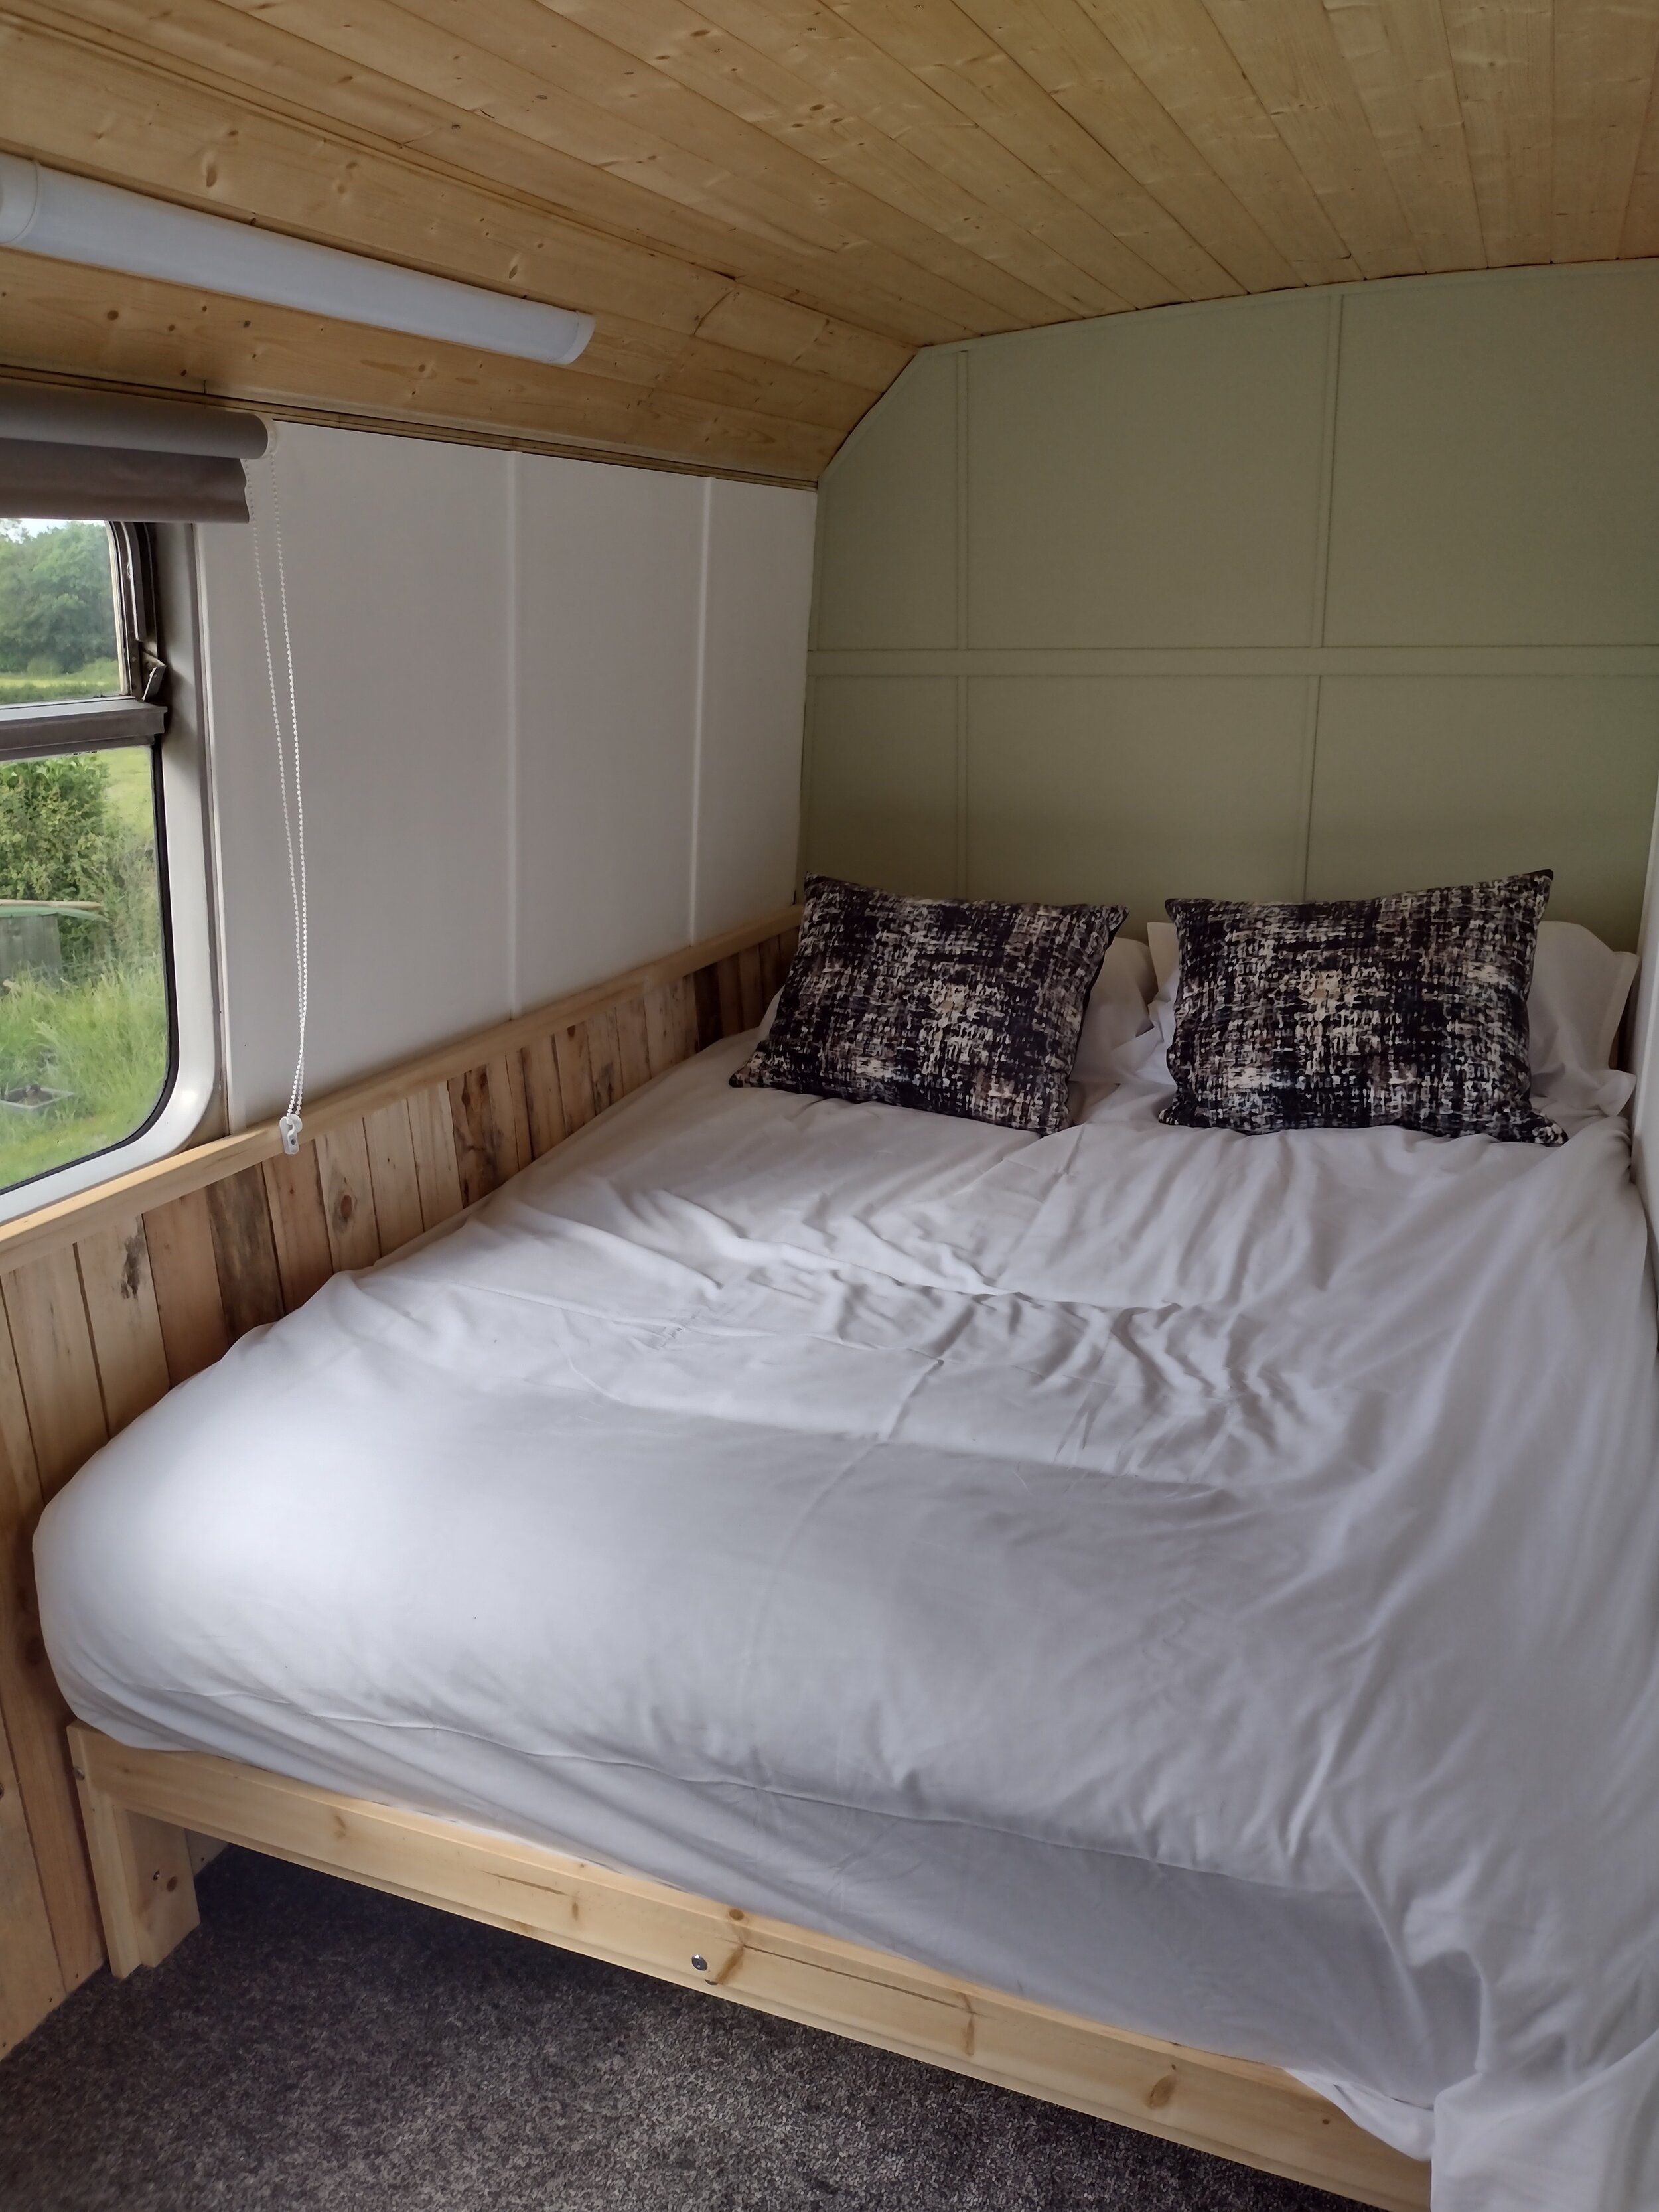 Stanford Farm's double decker bus conversion upstairs bedroom 2